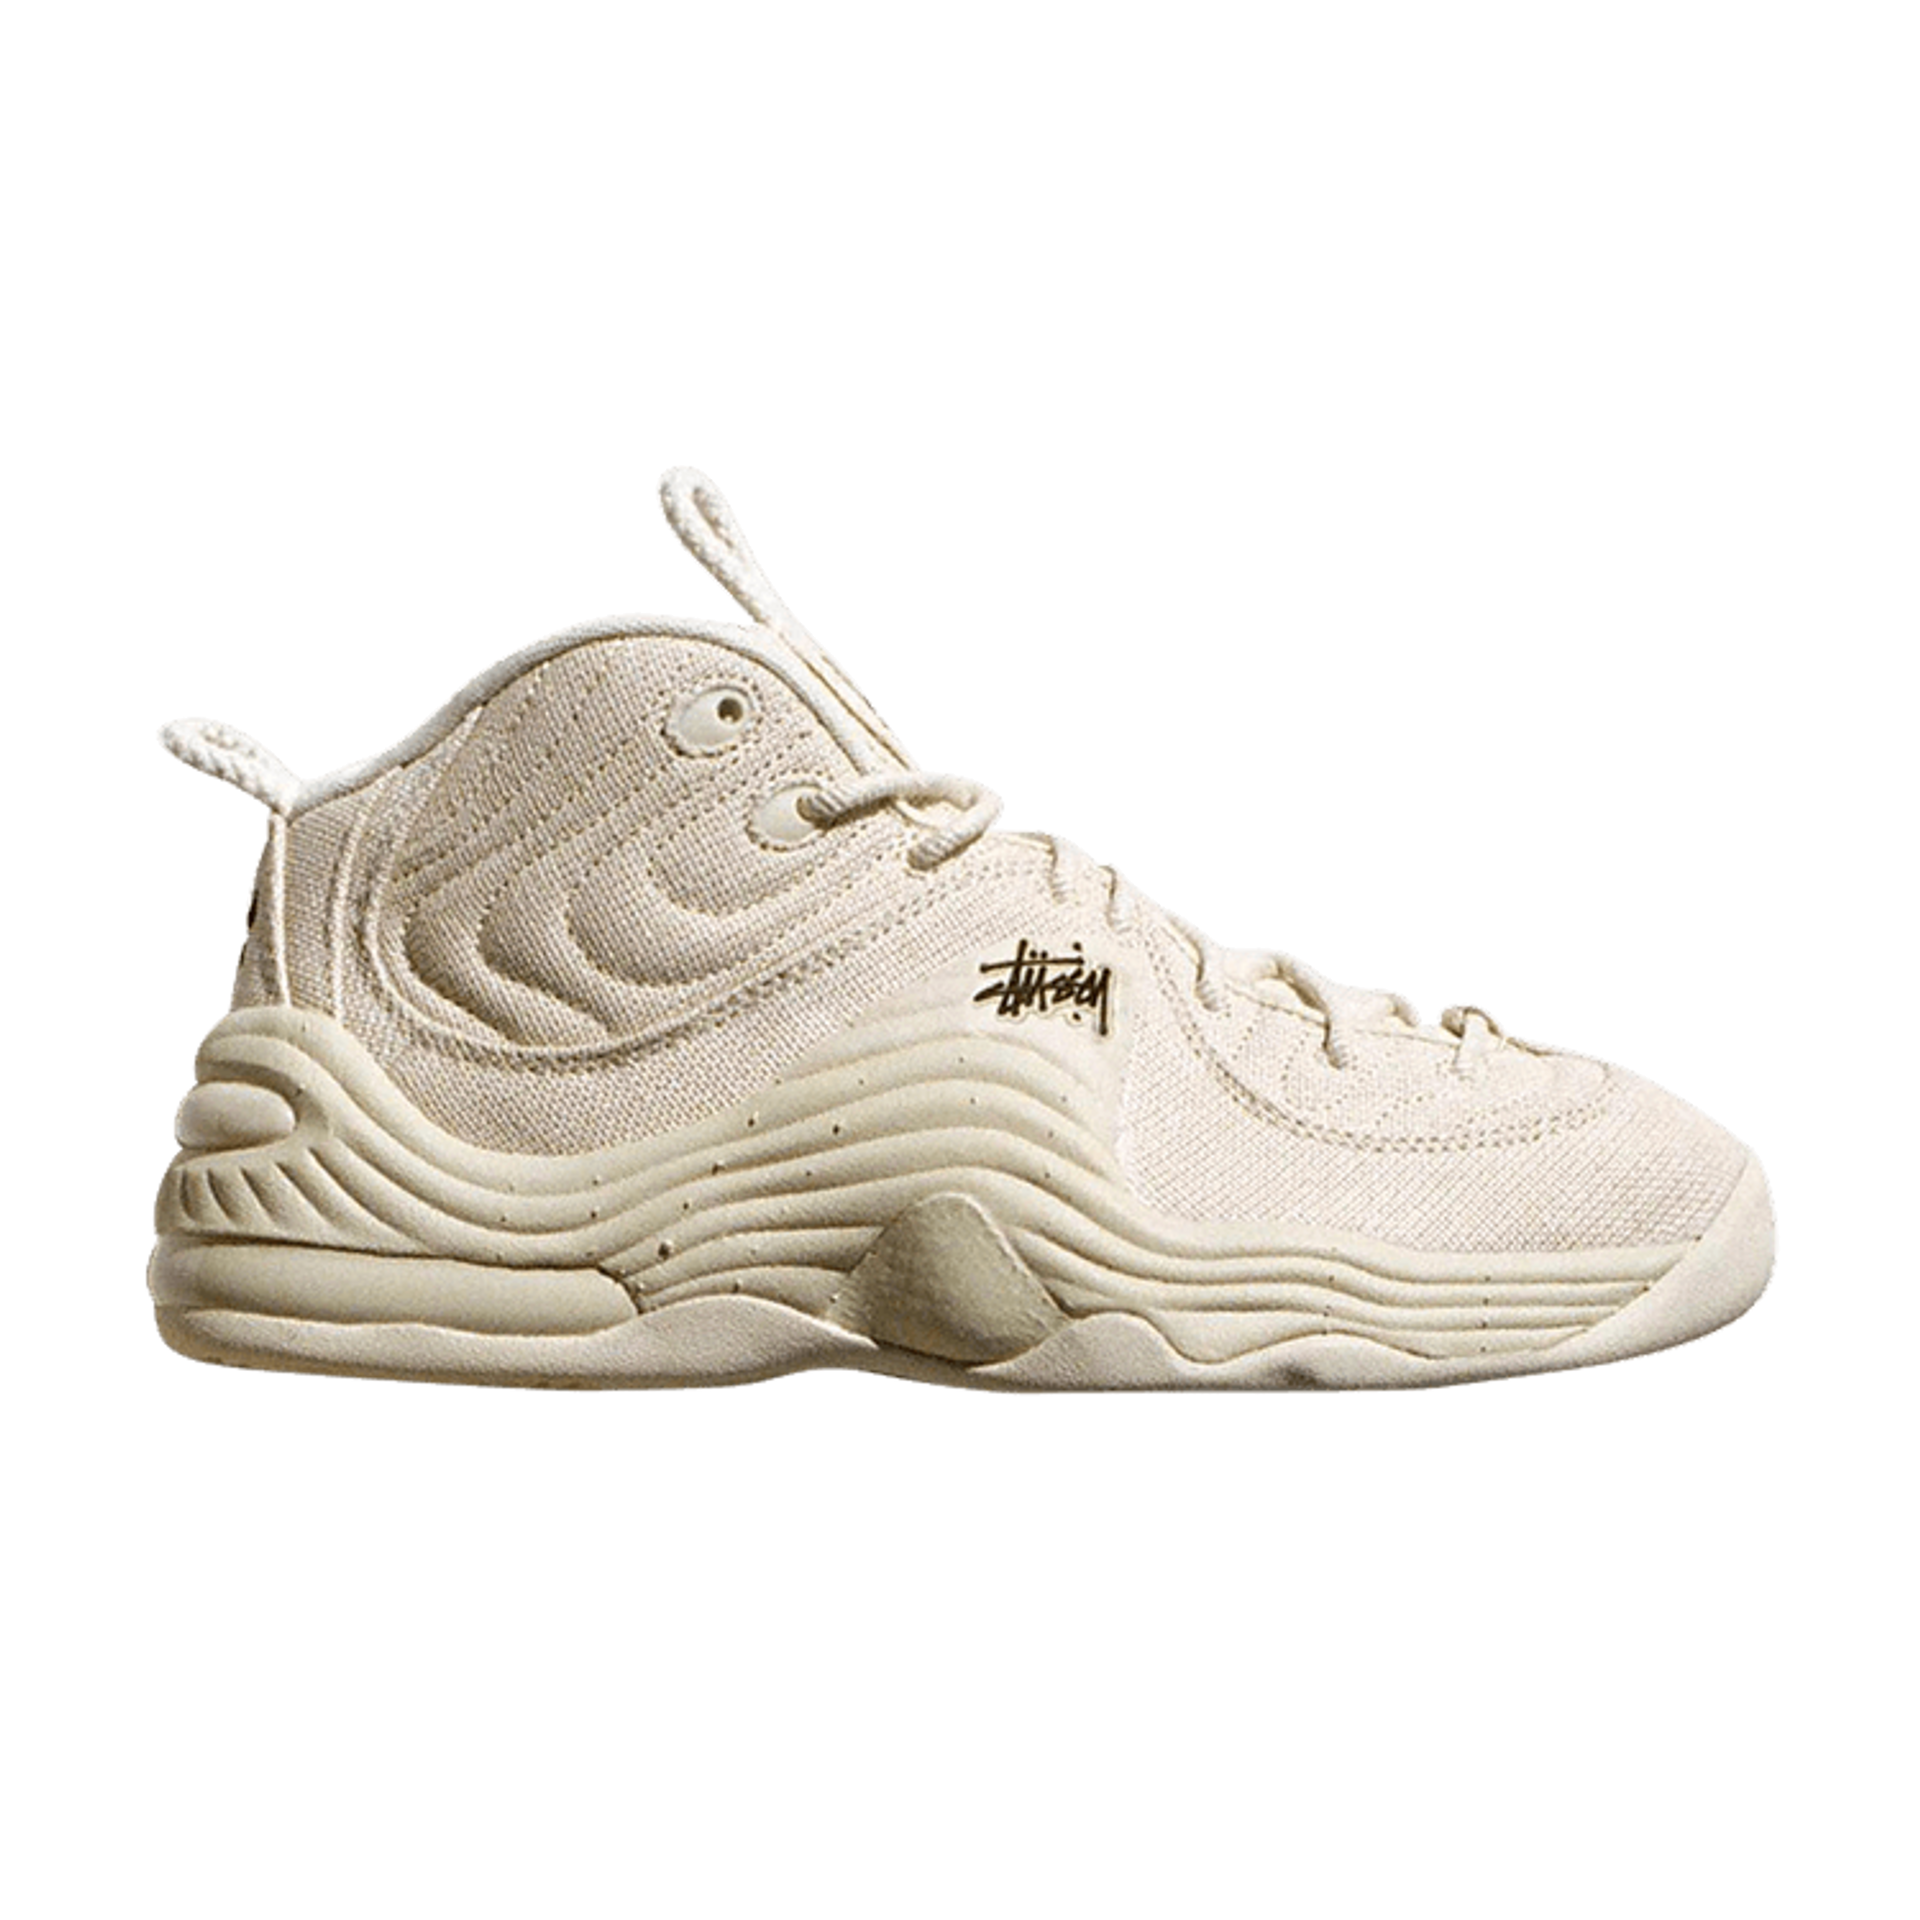 Stussy x Nike Air Penny 2 'Fossil'